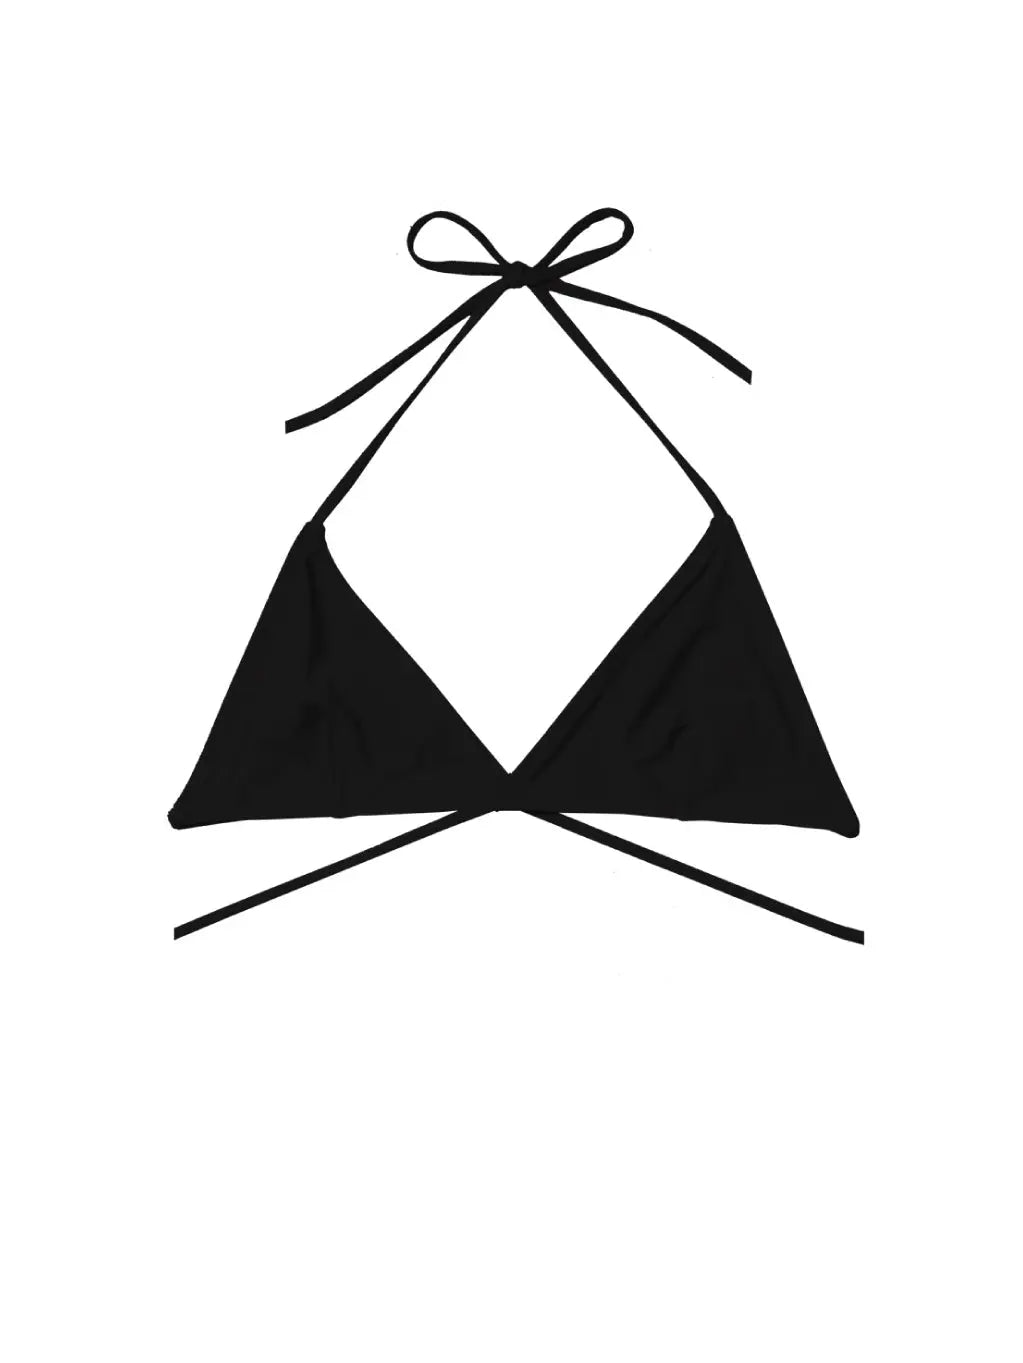 A Tredici Black Bikini Top by Lido with thin straps and a halter neck tie, available at Bassalstore Barcelona. The top features triangular cups and an additional wrap-around tie for securing the garment around the torso. The image has a minimalist white background.